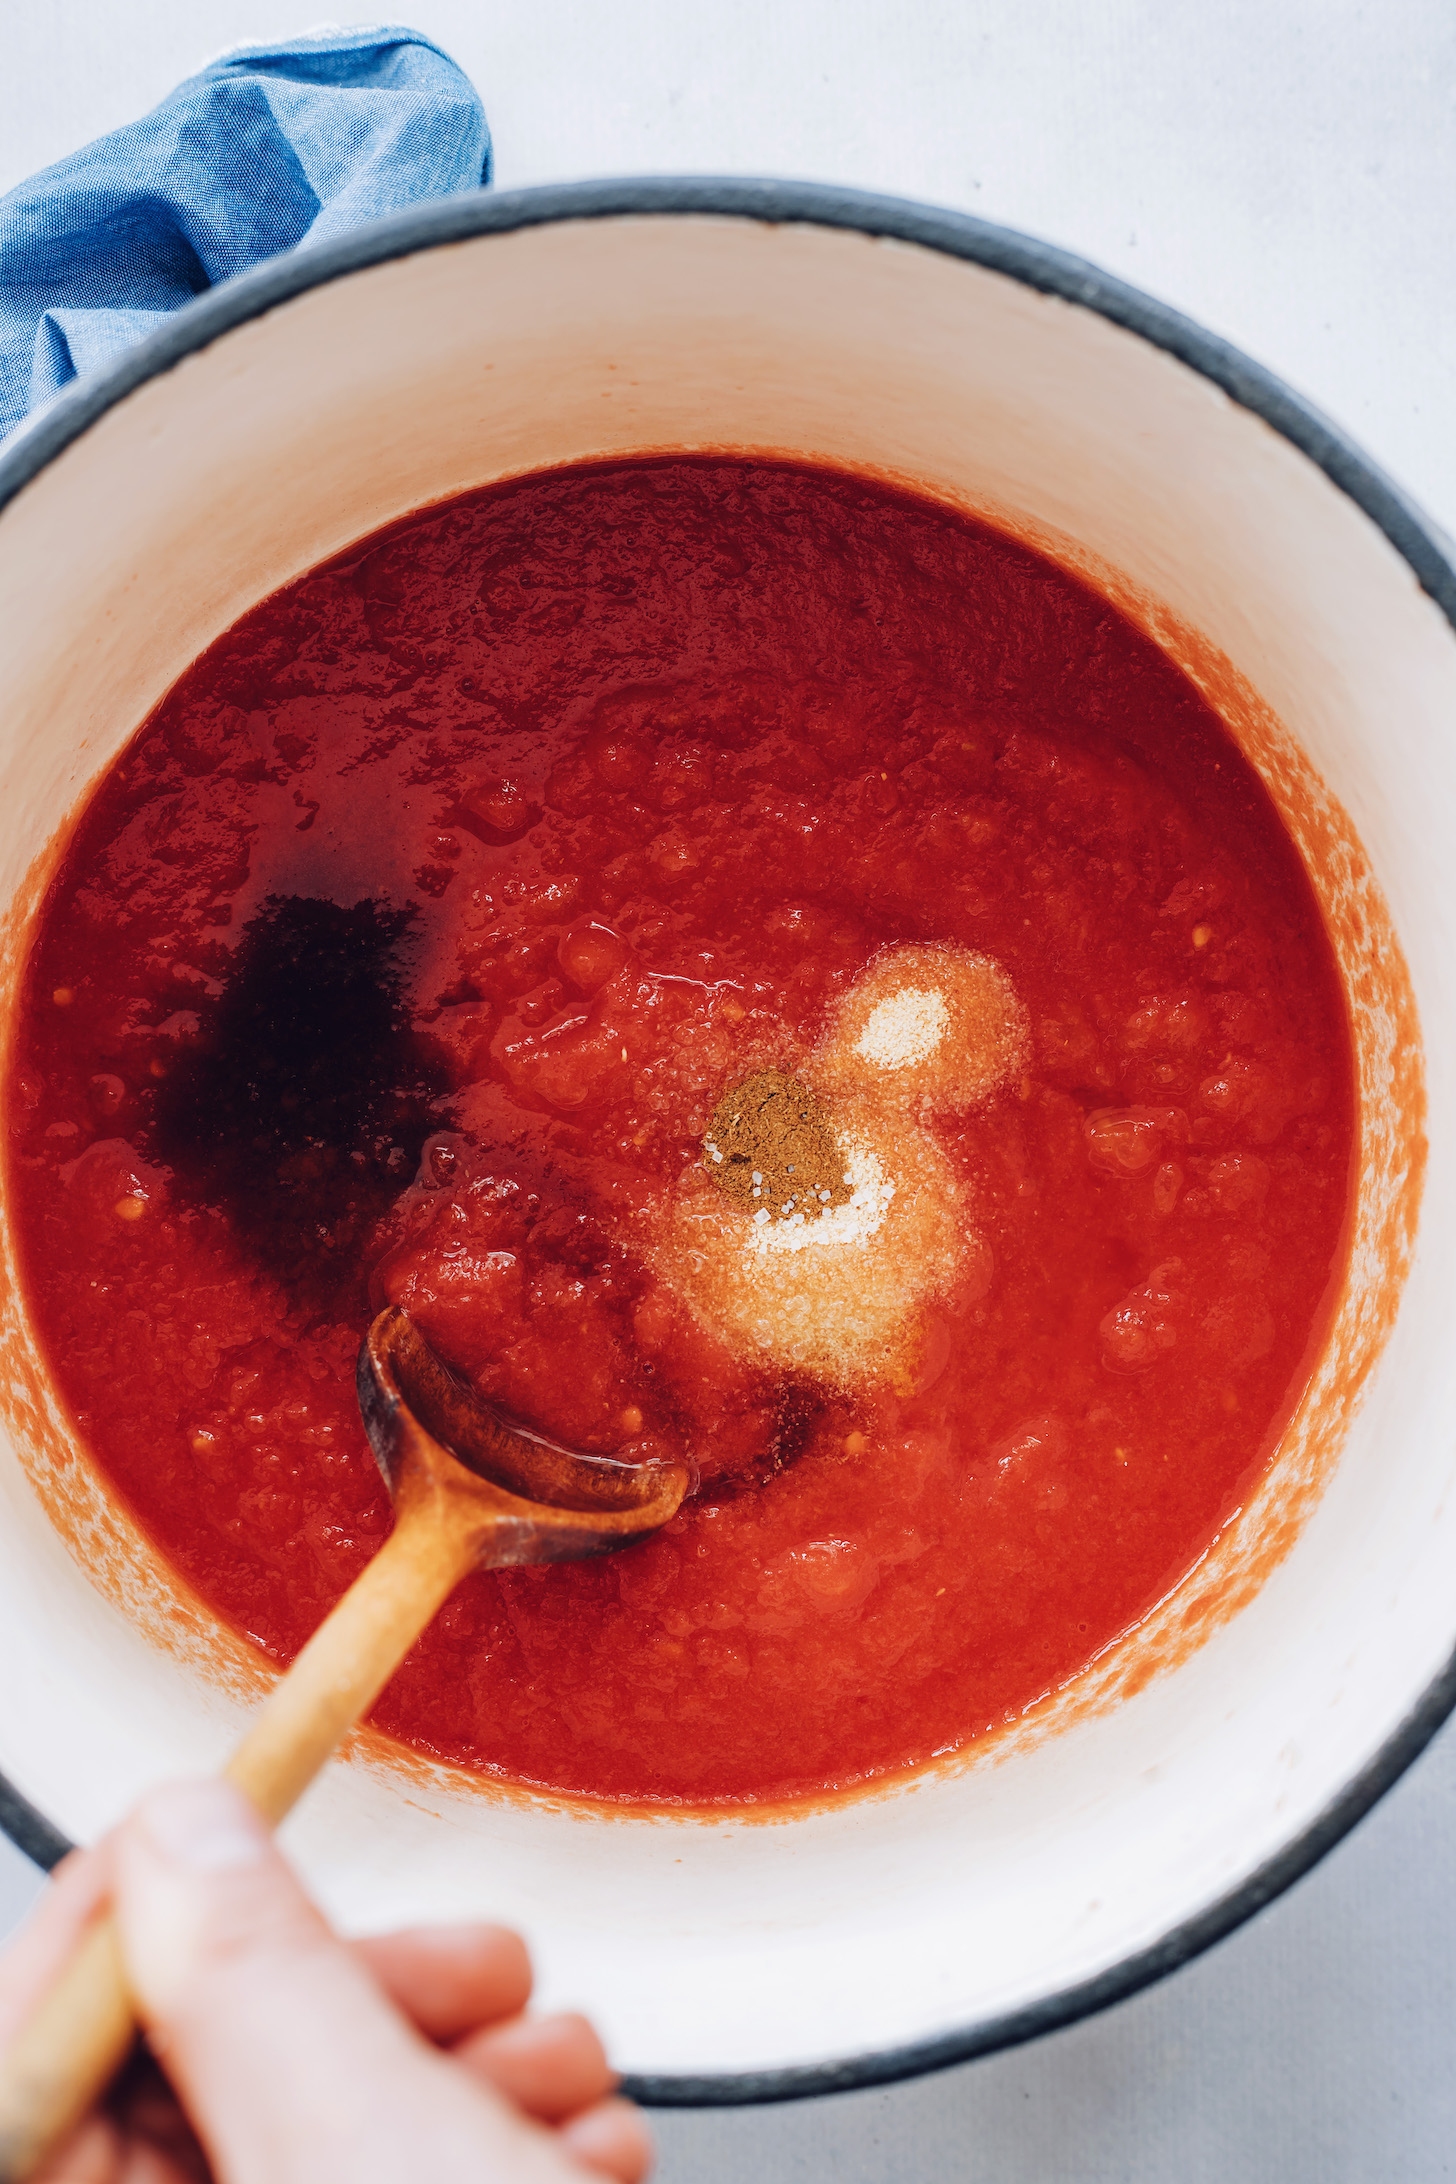 Pot of tomato purée, maple syrup, vinegar, salt, and spices